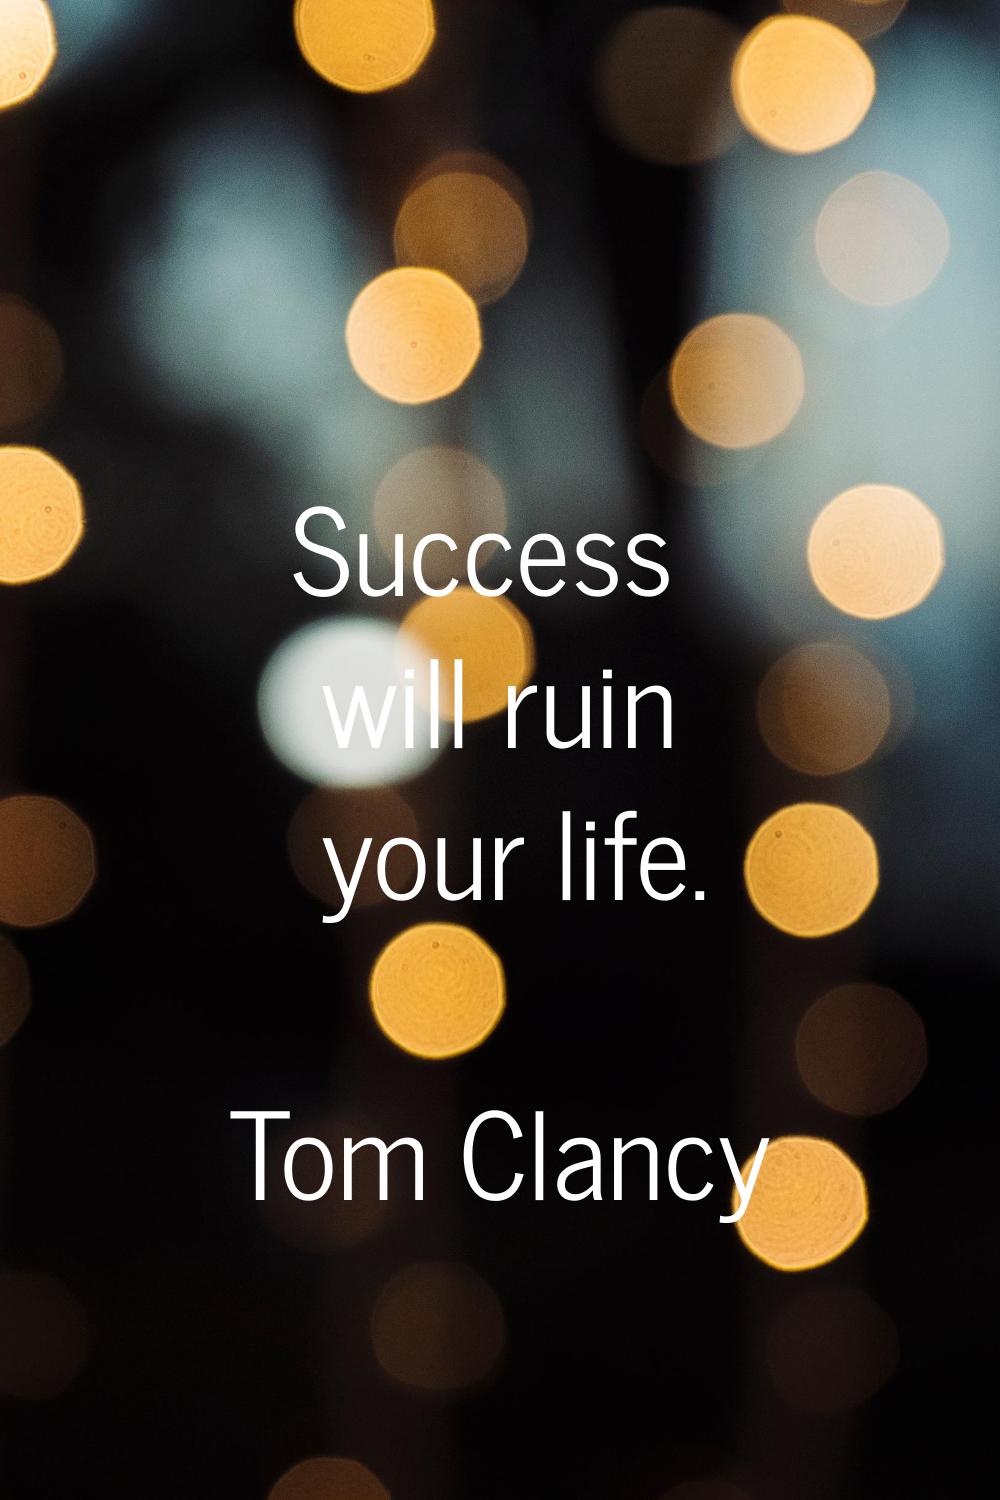 Success will ruin your life.